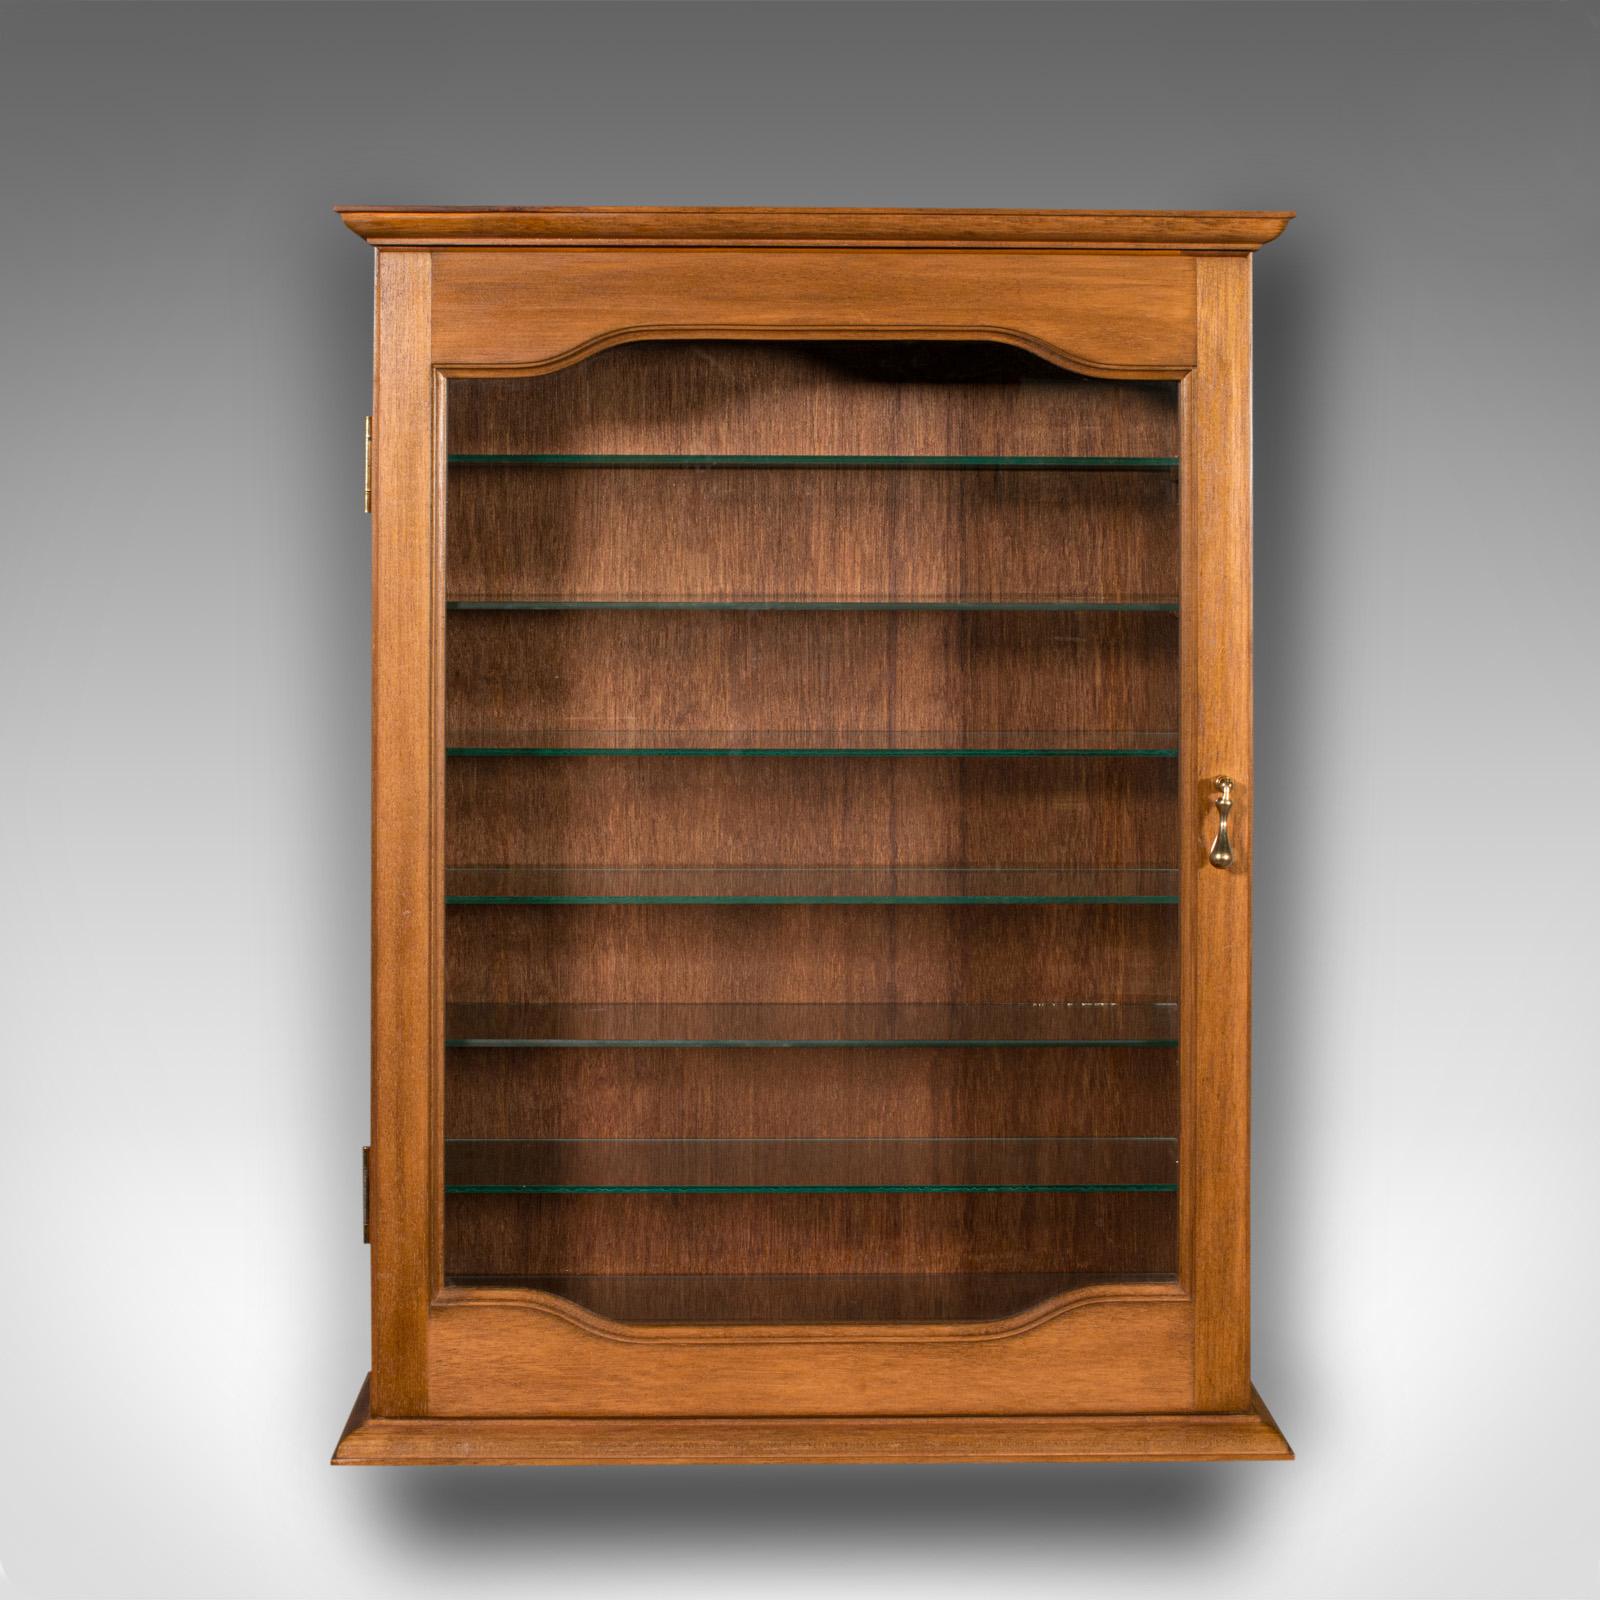 This is a vintage bespoke display cabinet. An English, mahogany and glass retail or collector's shelf cupboard, dating to the late 20th century.

Beautifully glazed and of high quality - superb for the Dinky collector or other small items
Displaying